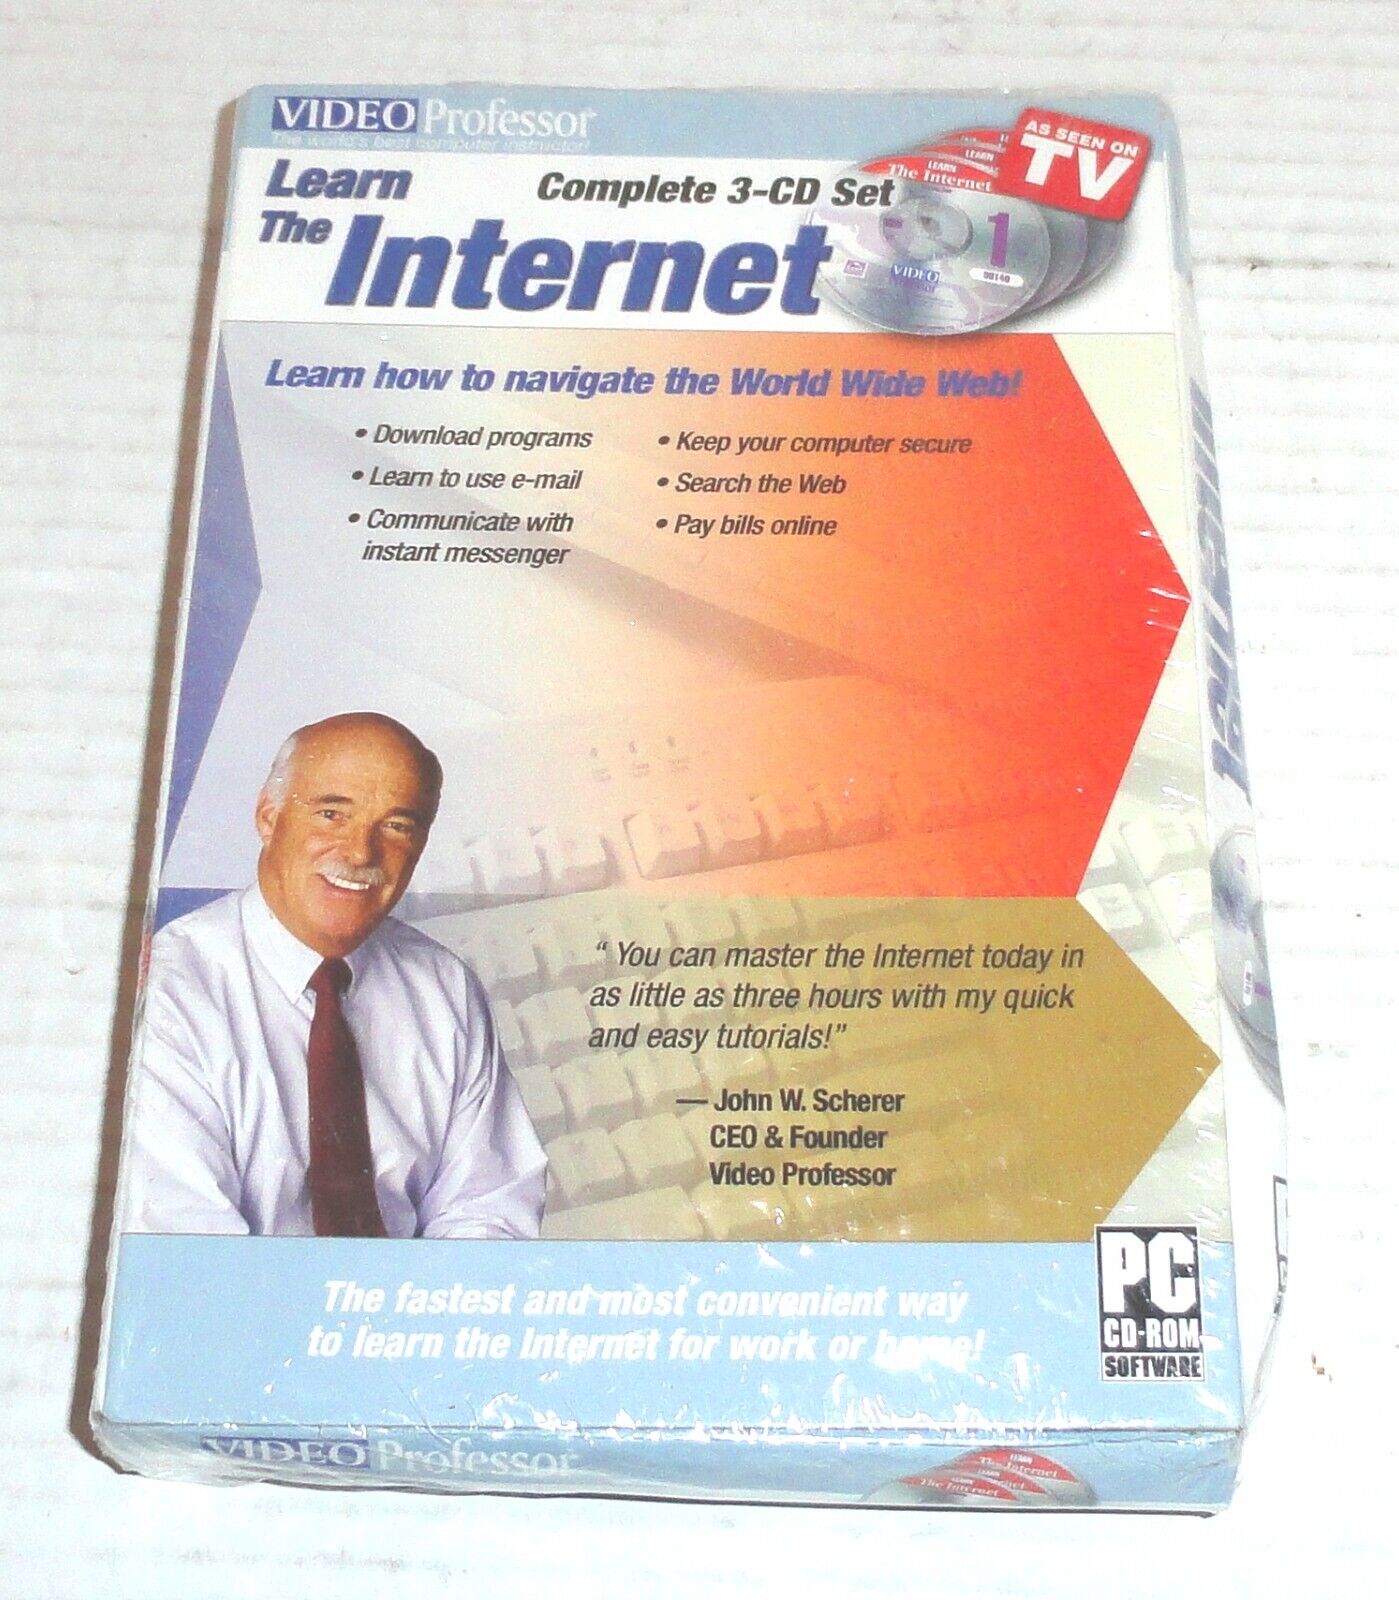 Video Professor - Learn The Internet Complete 3-CD Set for PC PLEASE READ